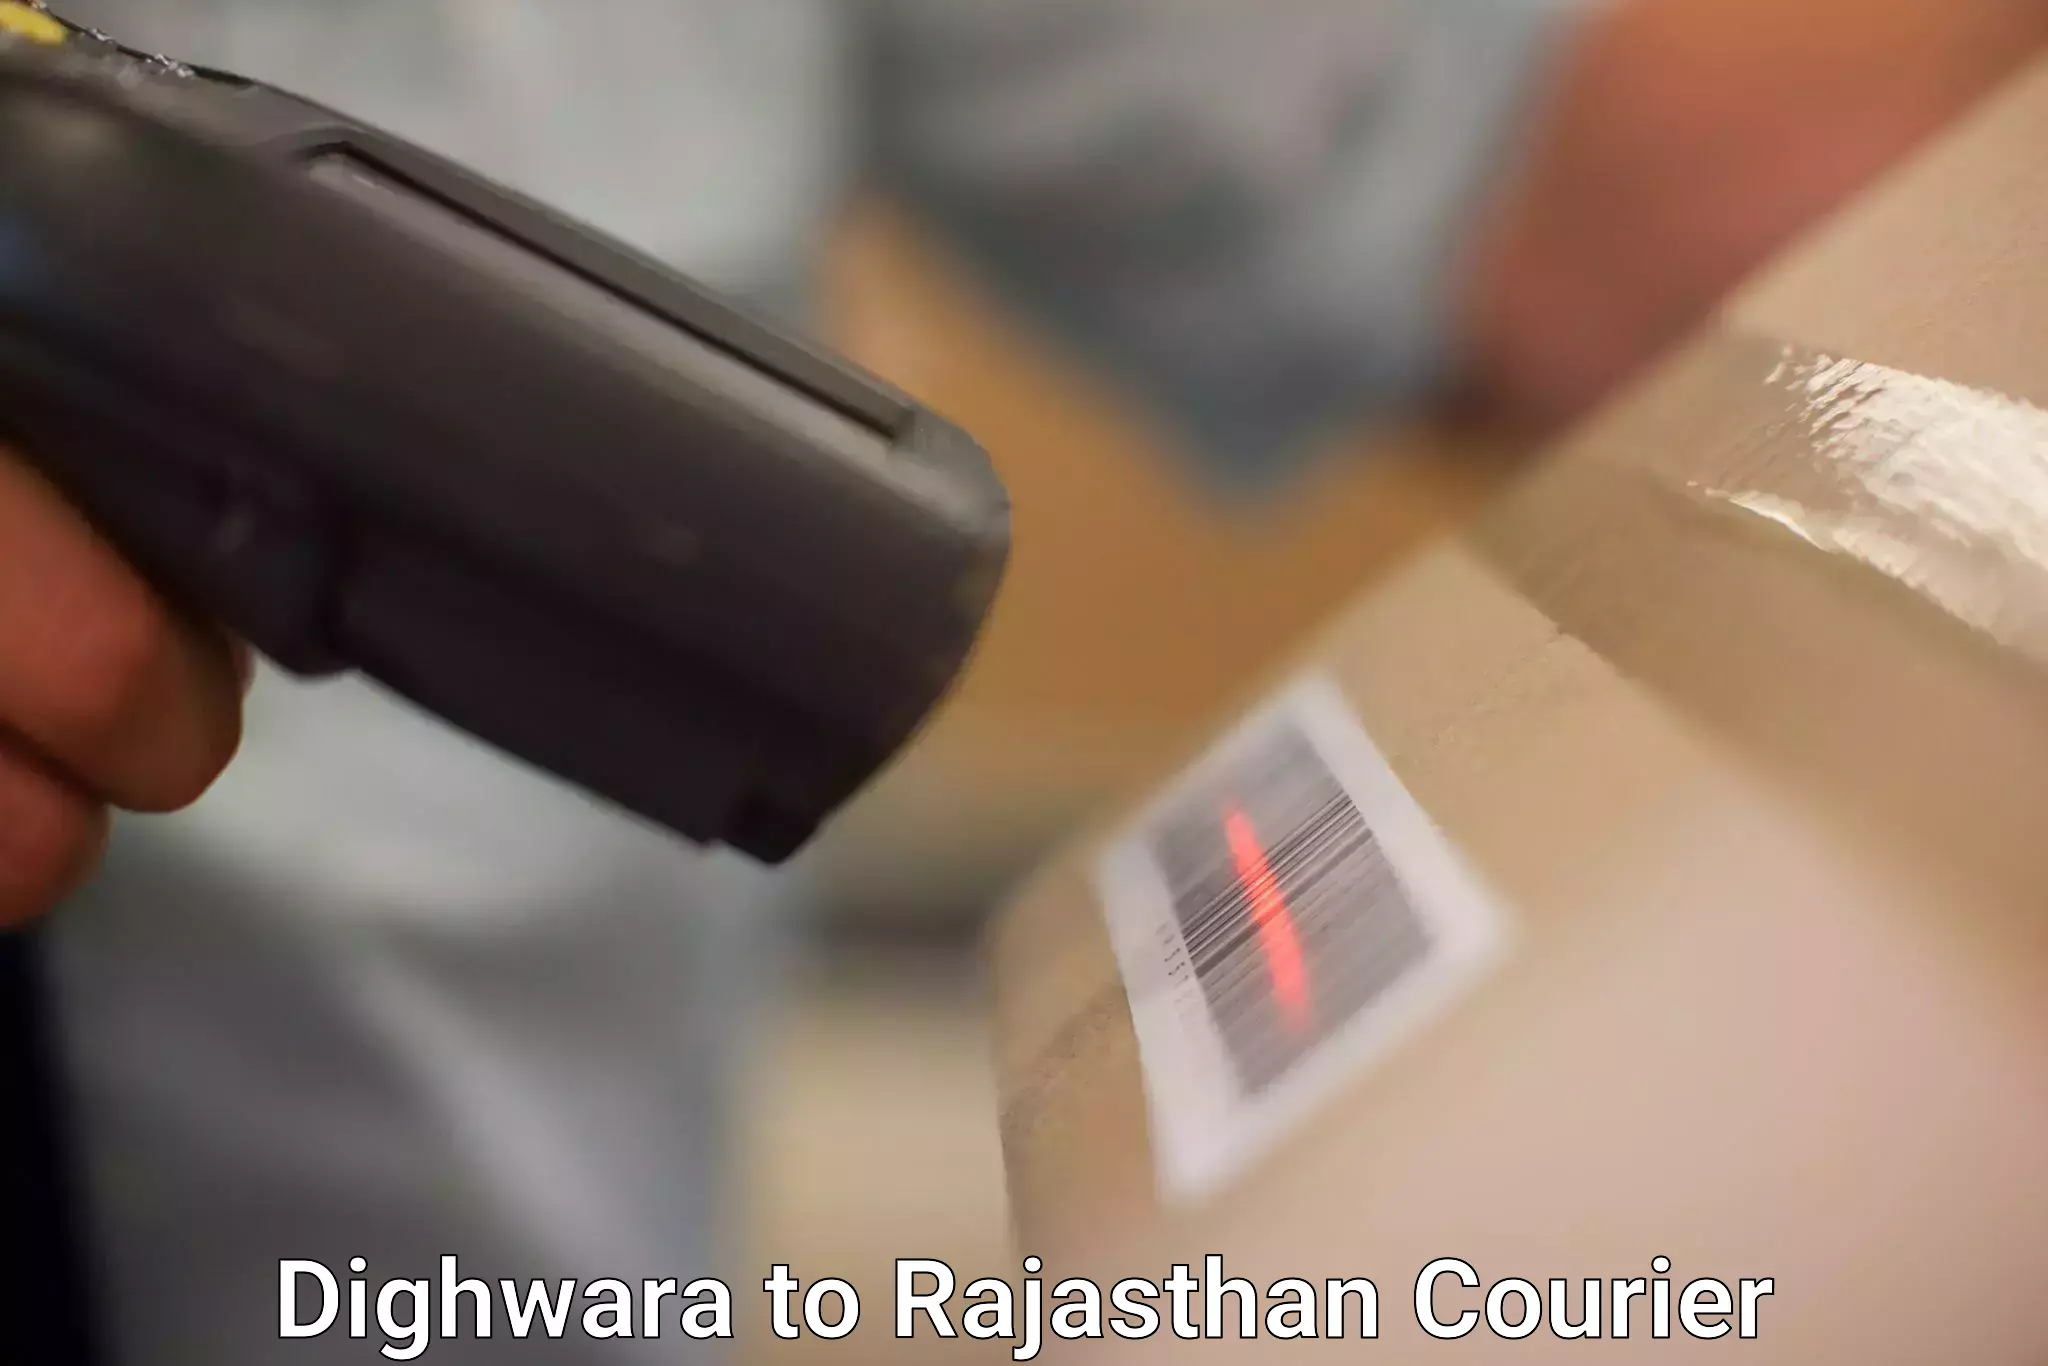 On-call courier service Dighwara to Sultana